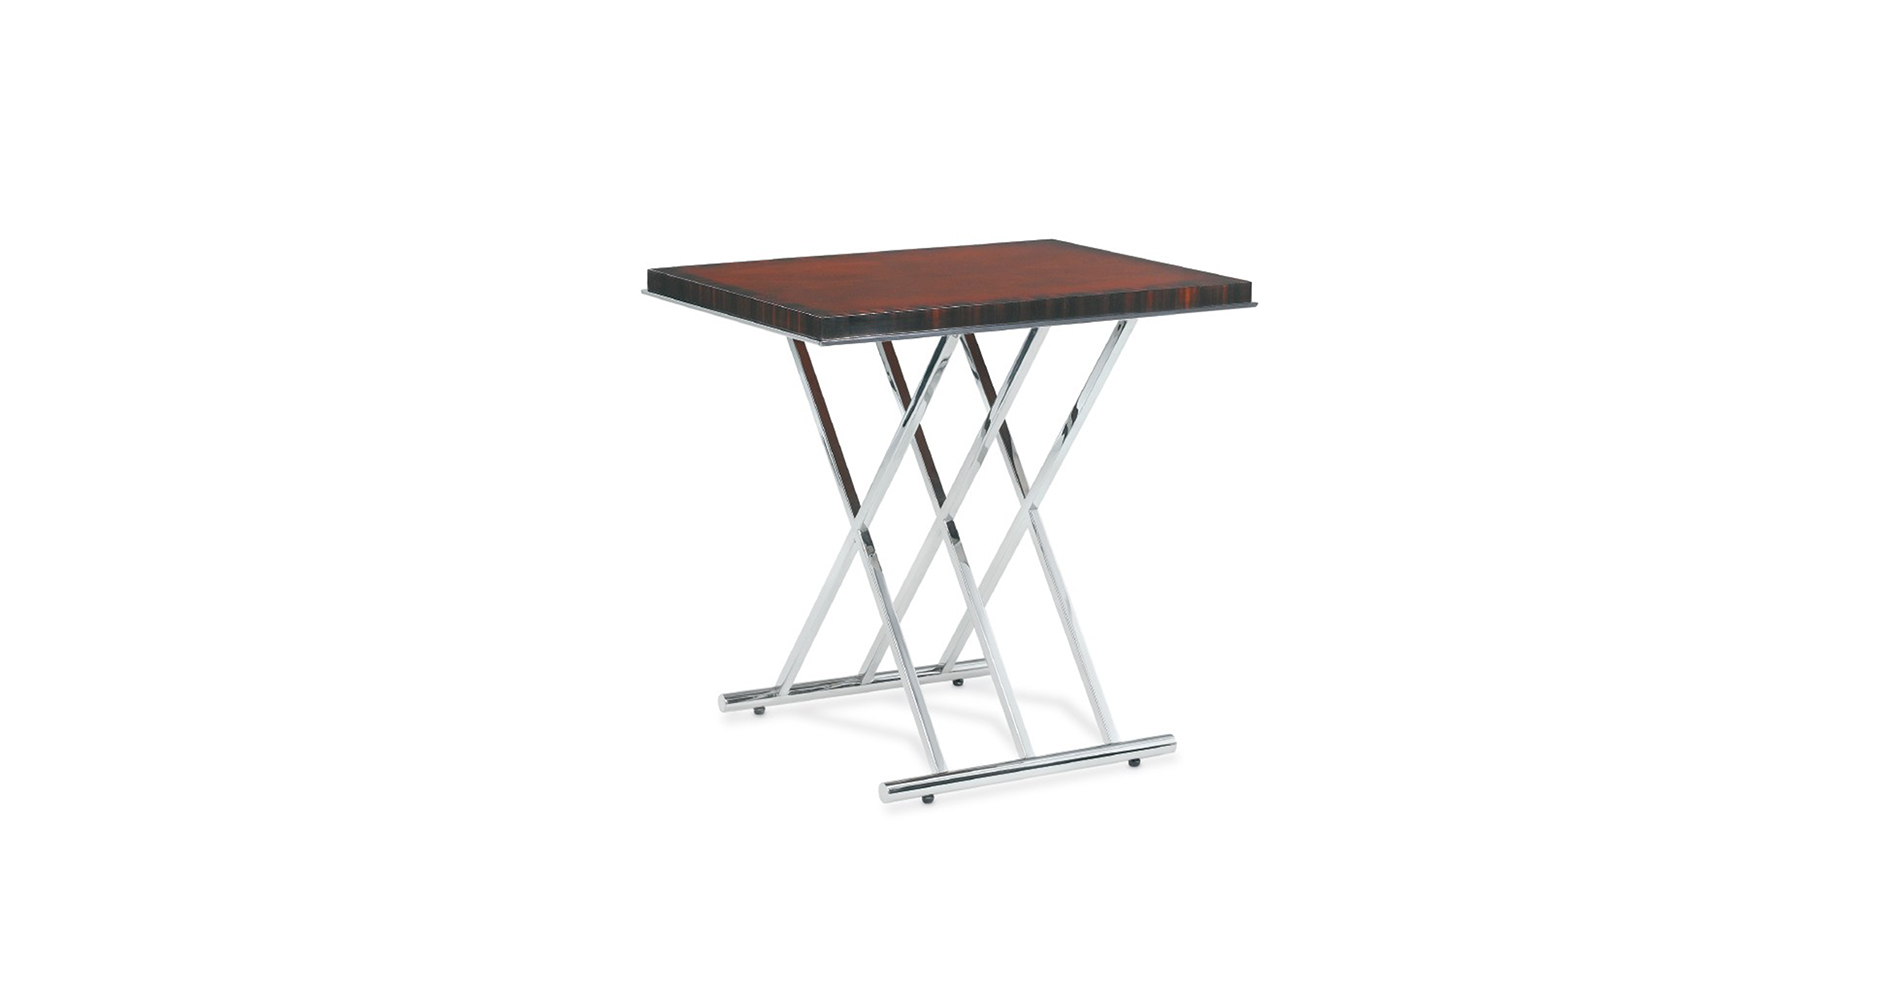 An image of Dalton Side Table